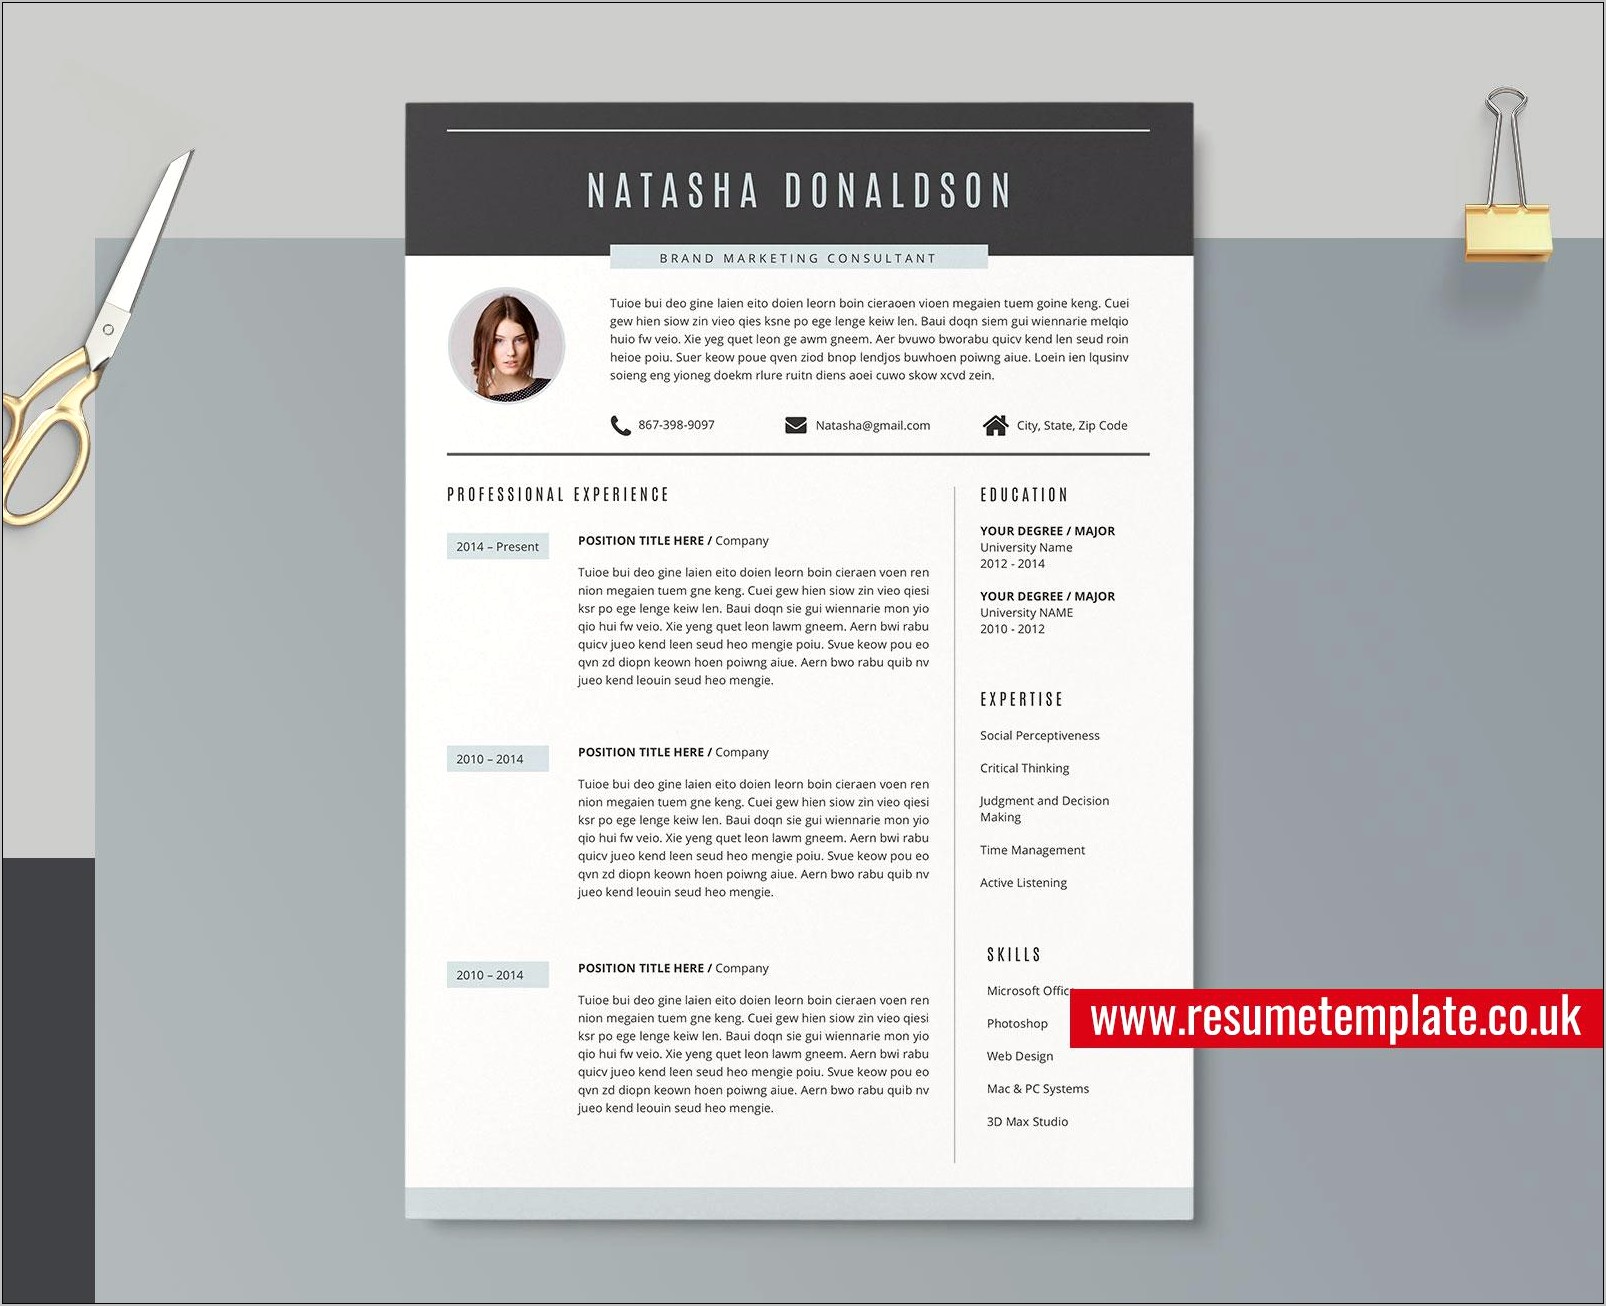 Download Resume Template For Microsoft Word 2010